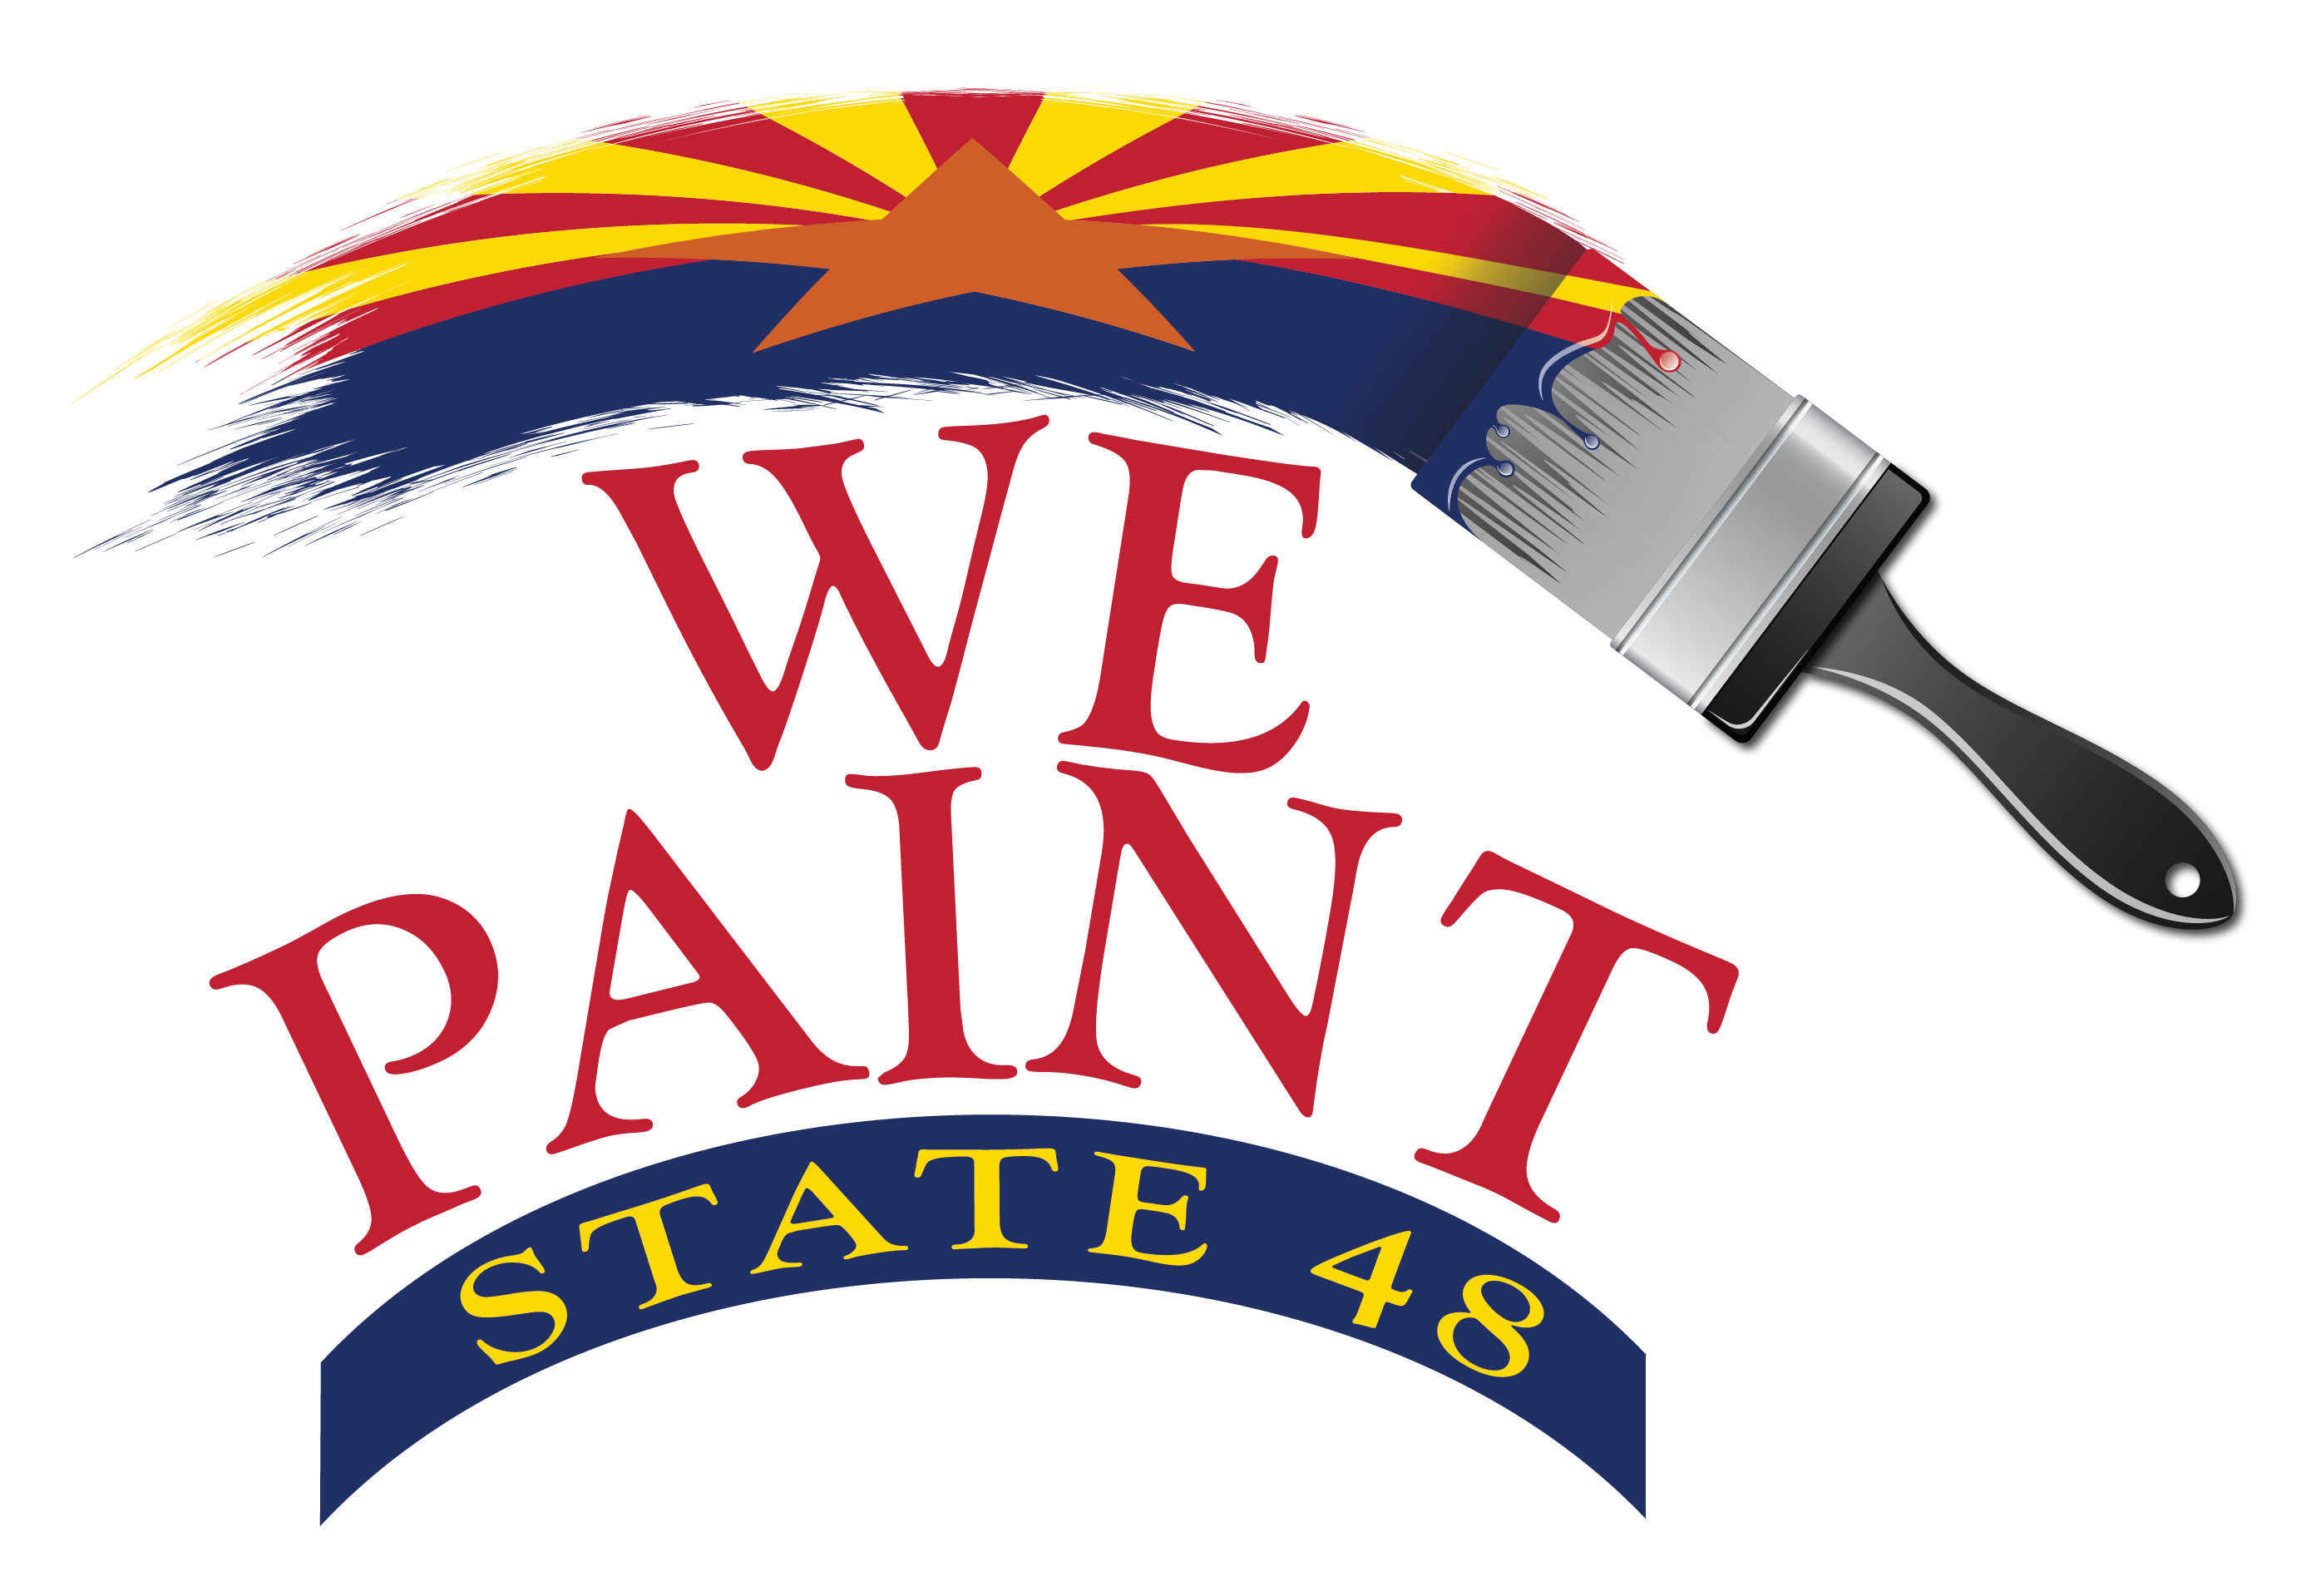 We Paint State 48